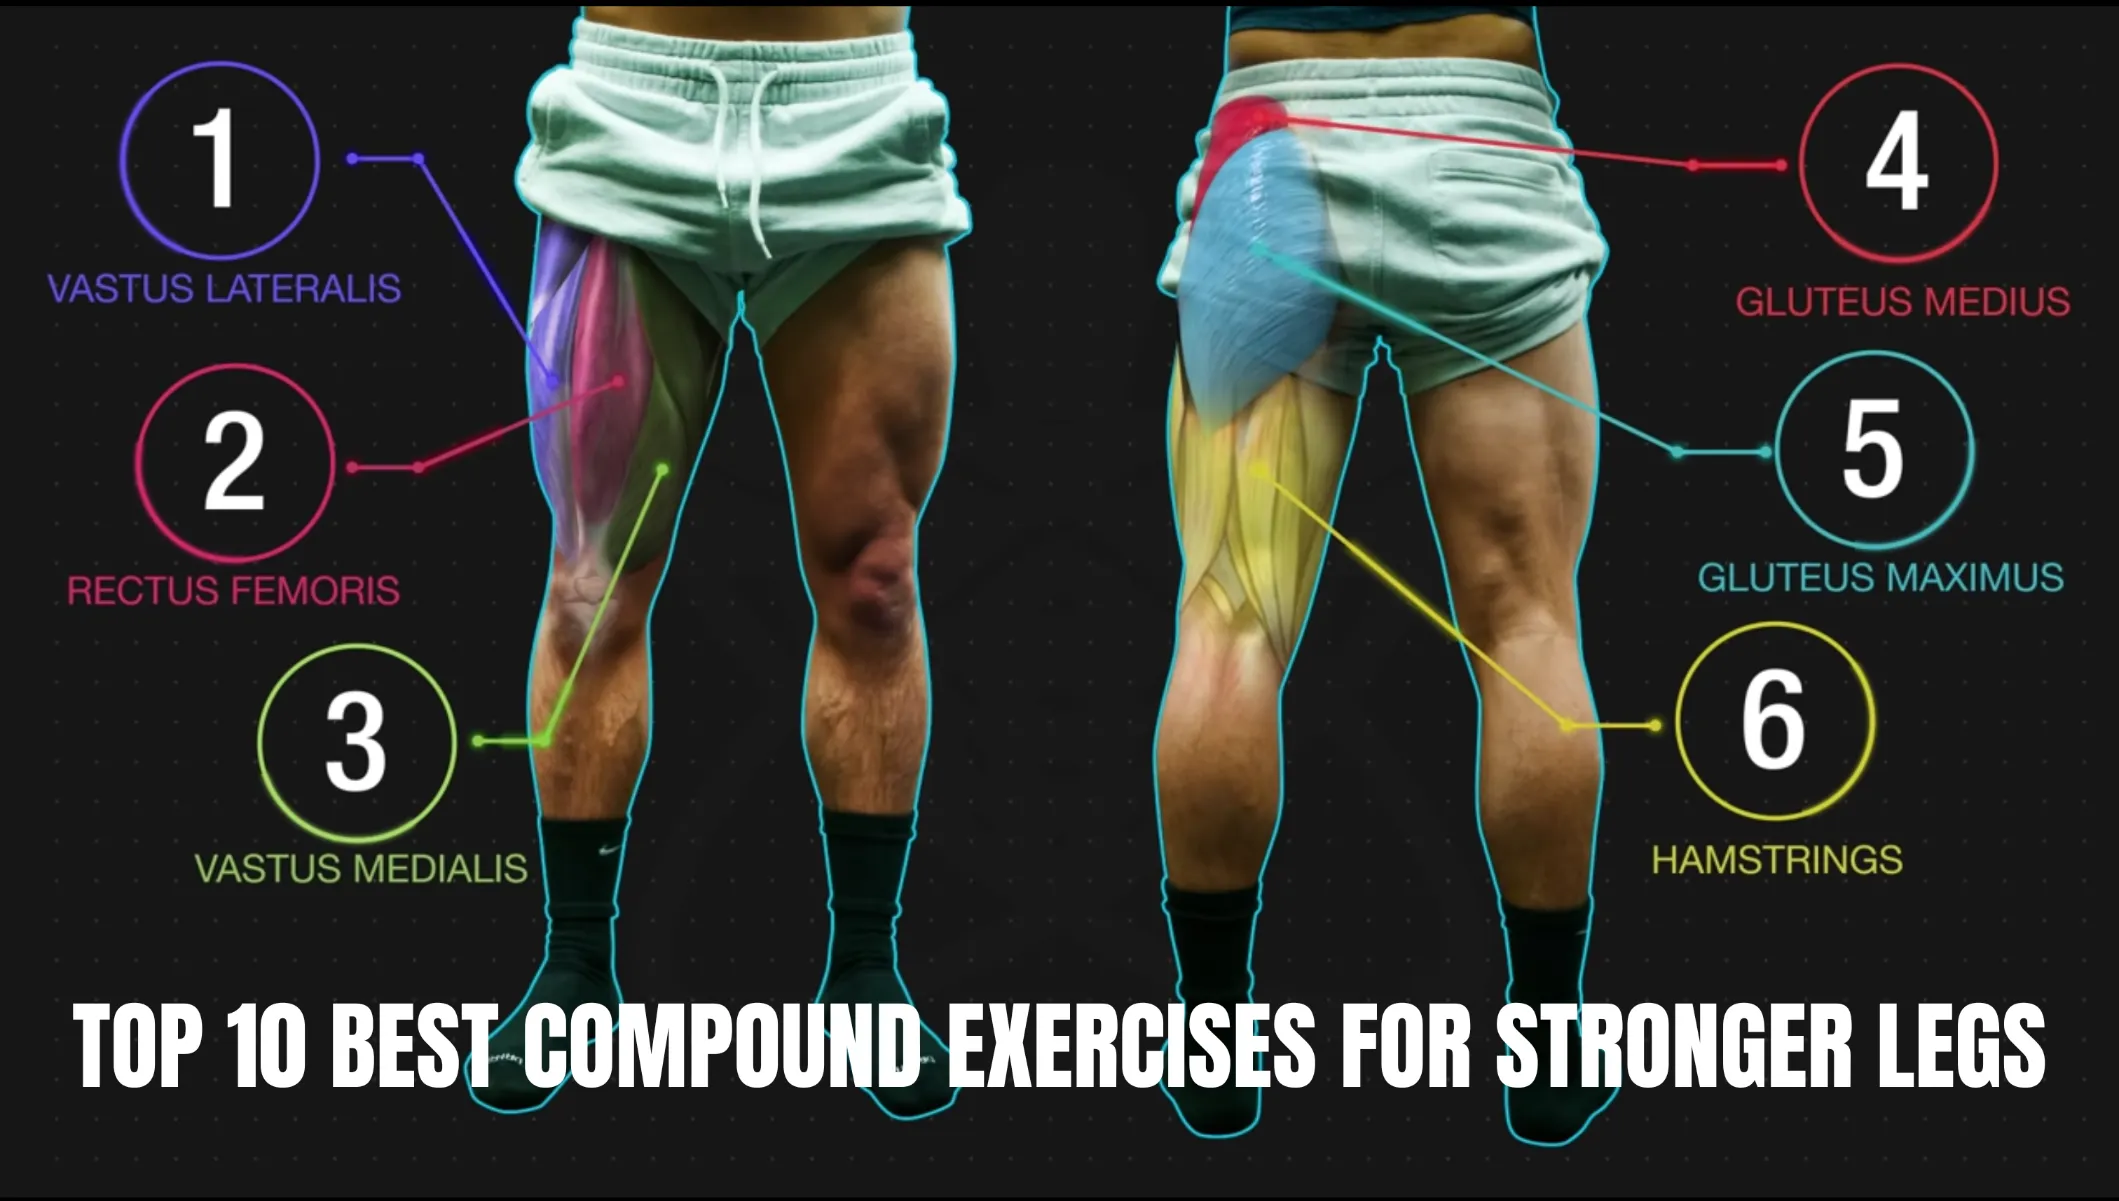 Top 10 best compound exercises for stronger legs cover image